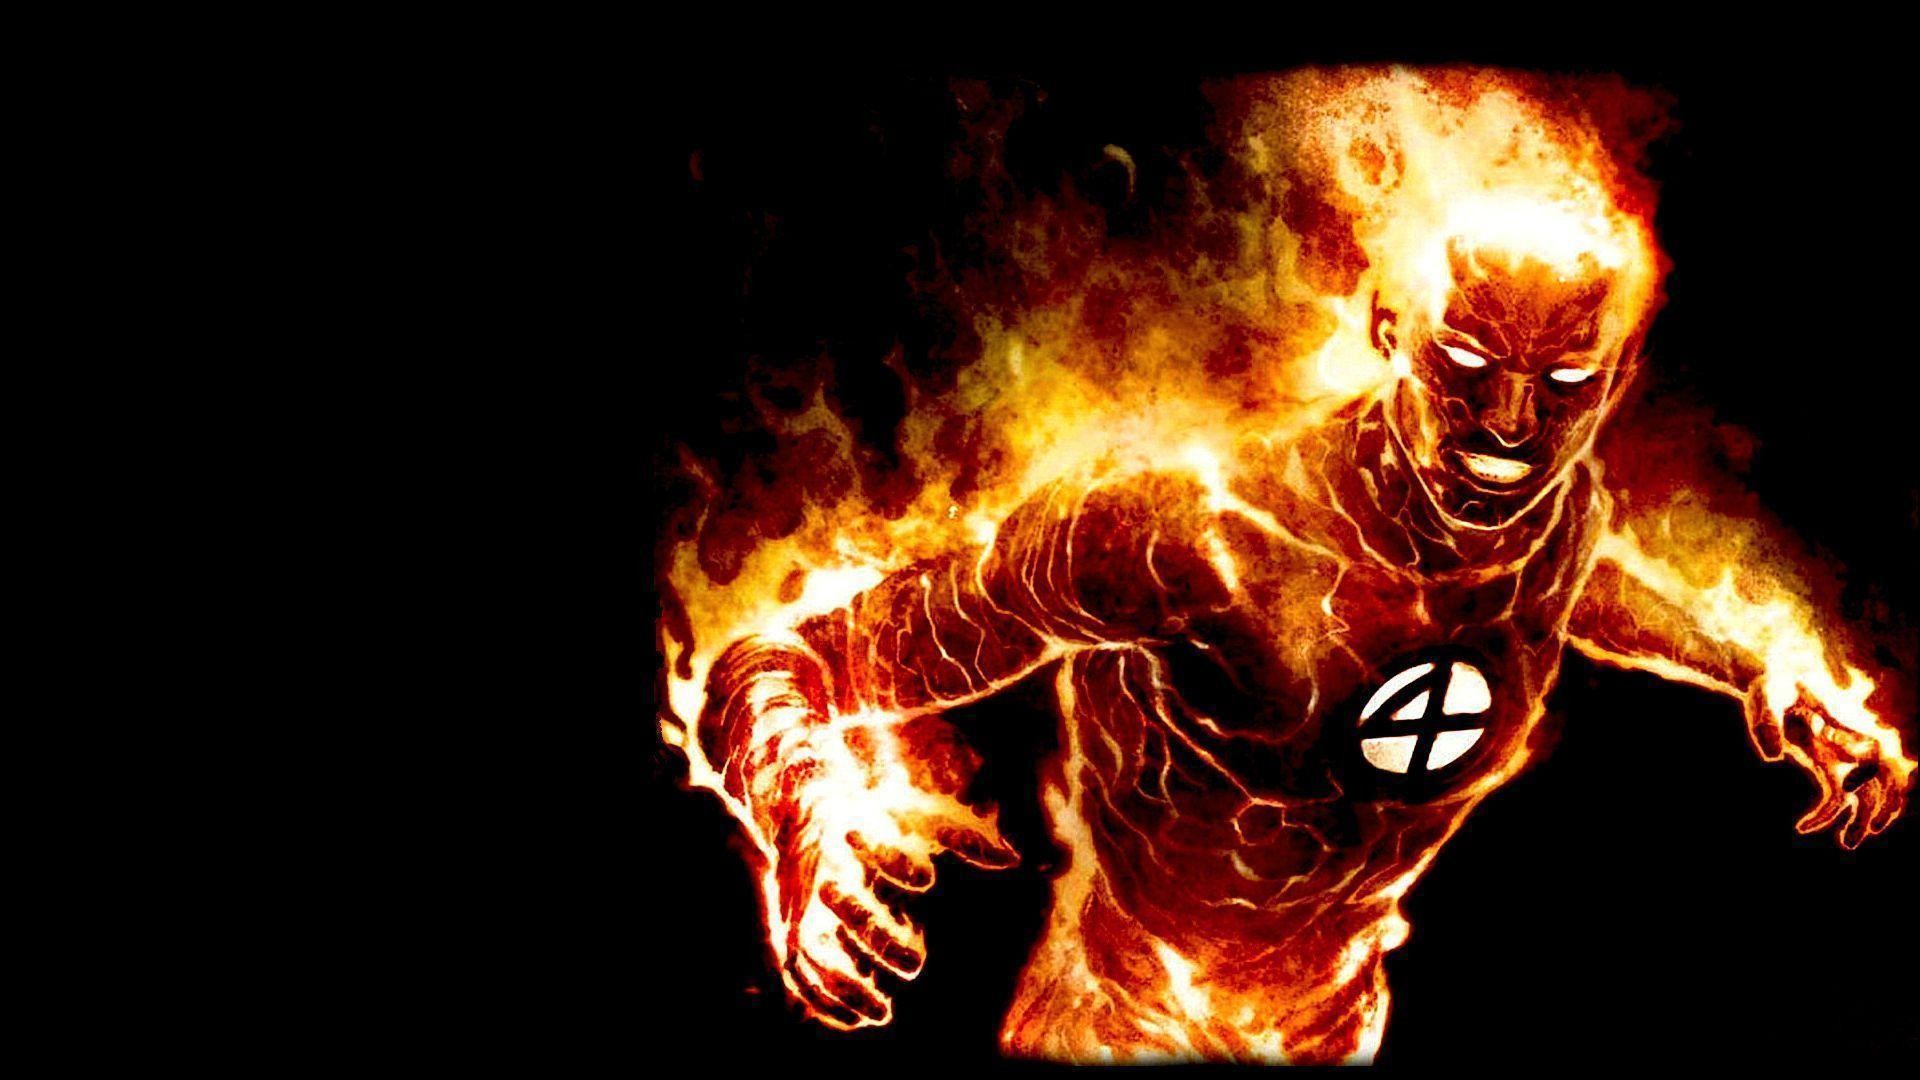 1920x1080 Human Torch 3 263698 Images HD Wallpapers| Wallfoy.com